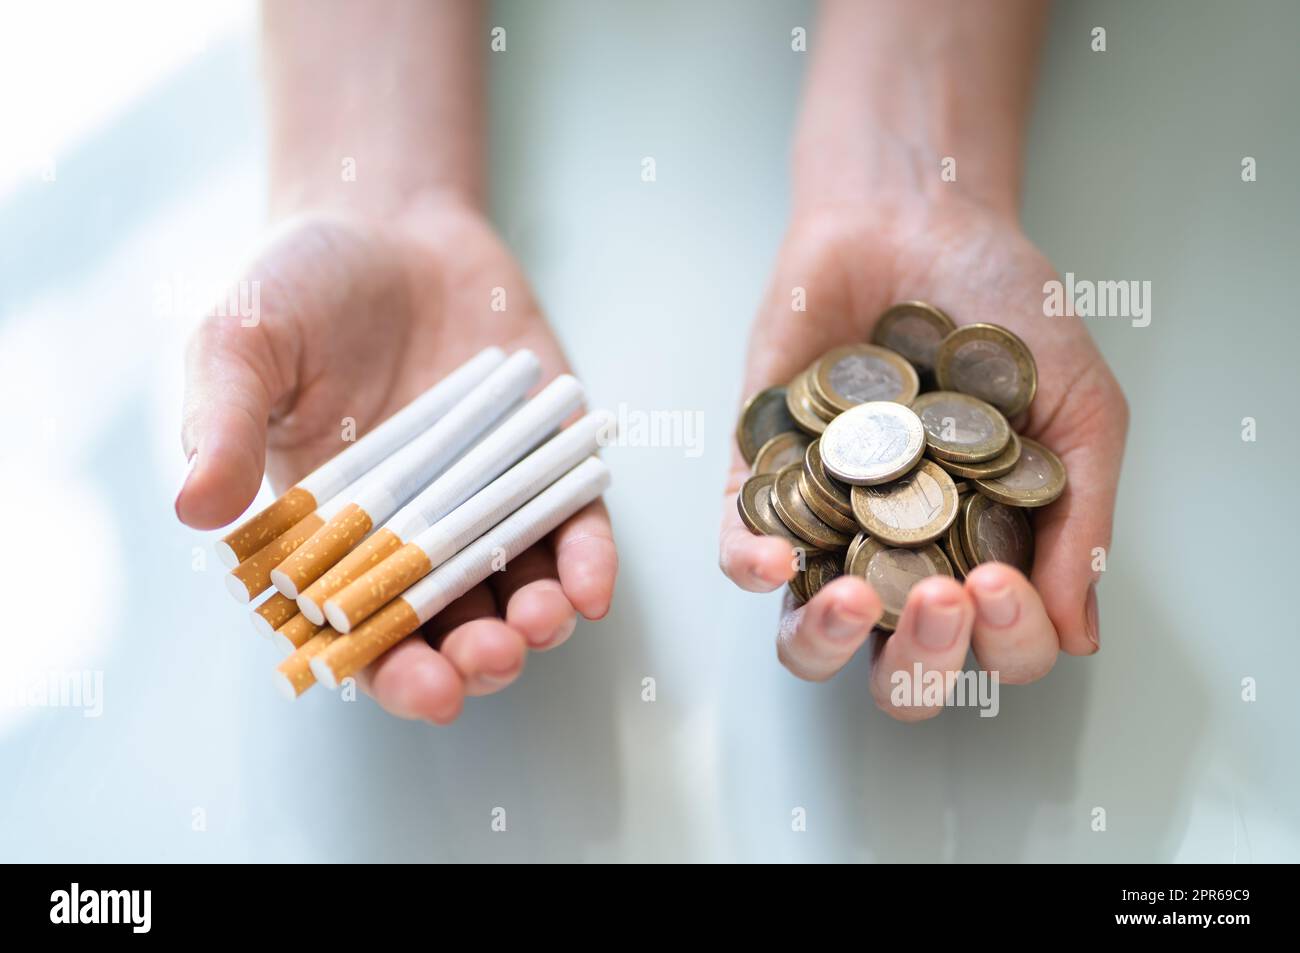 Cigarette Smoking Cost And Budget Money Loss Stock Photo